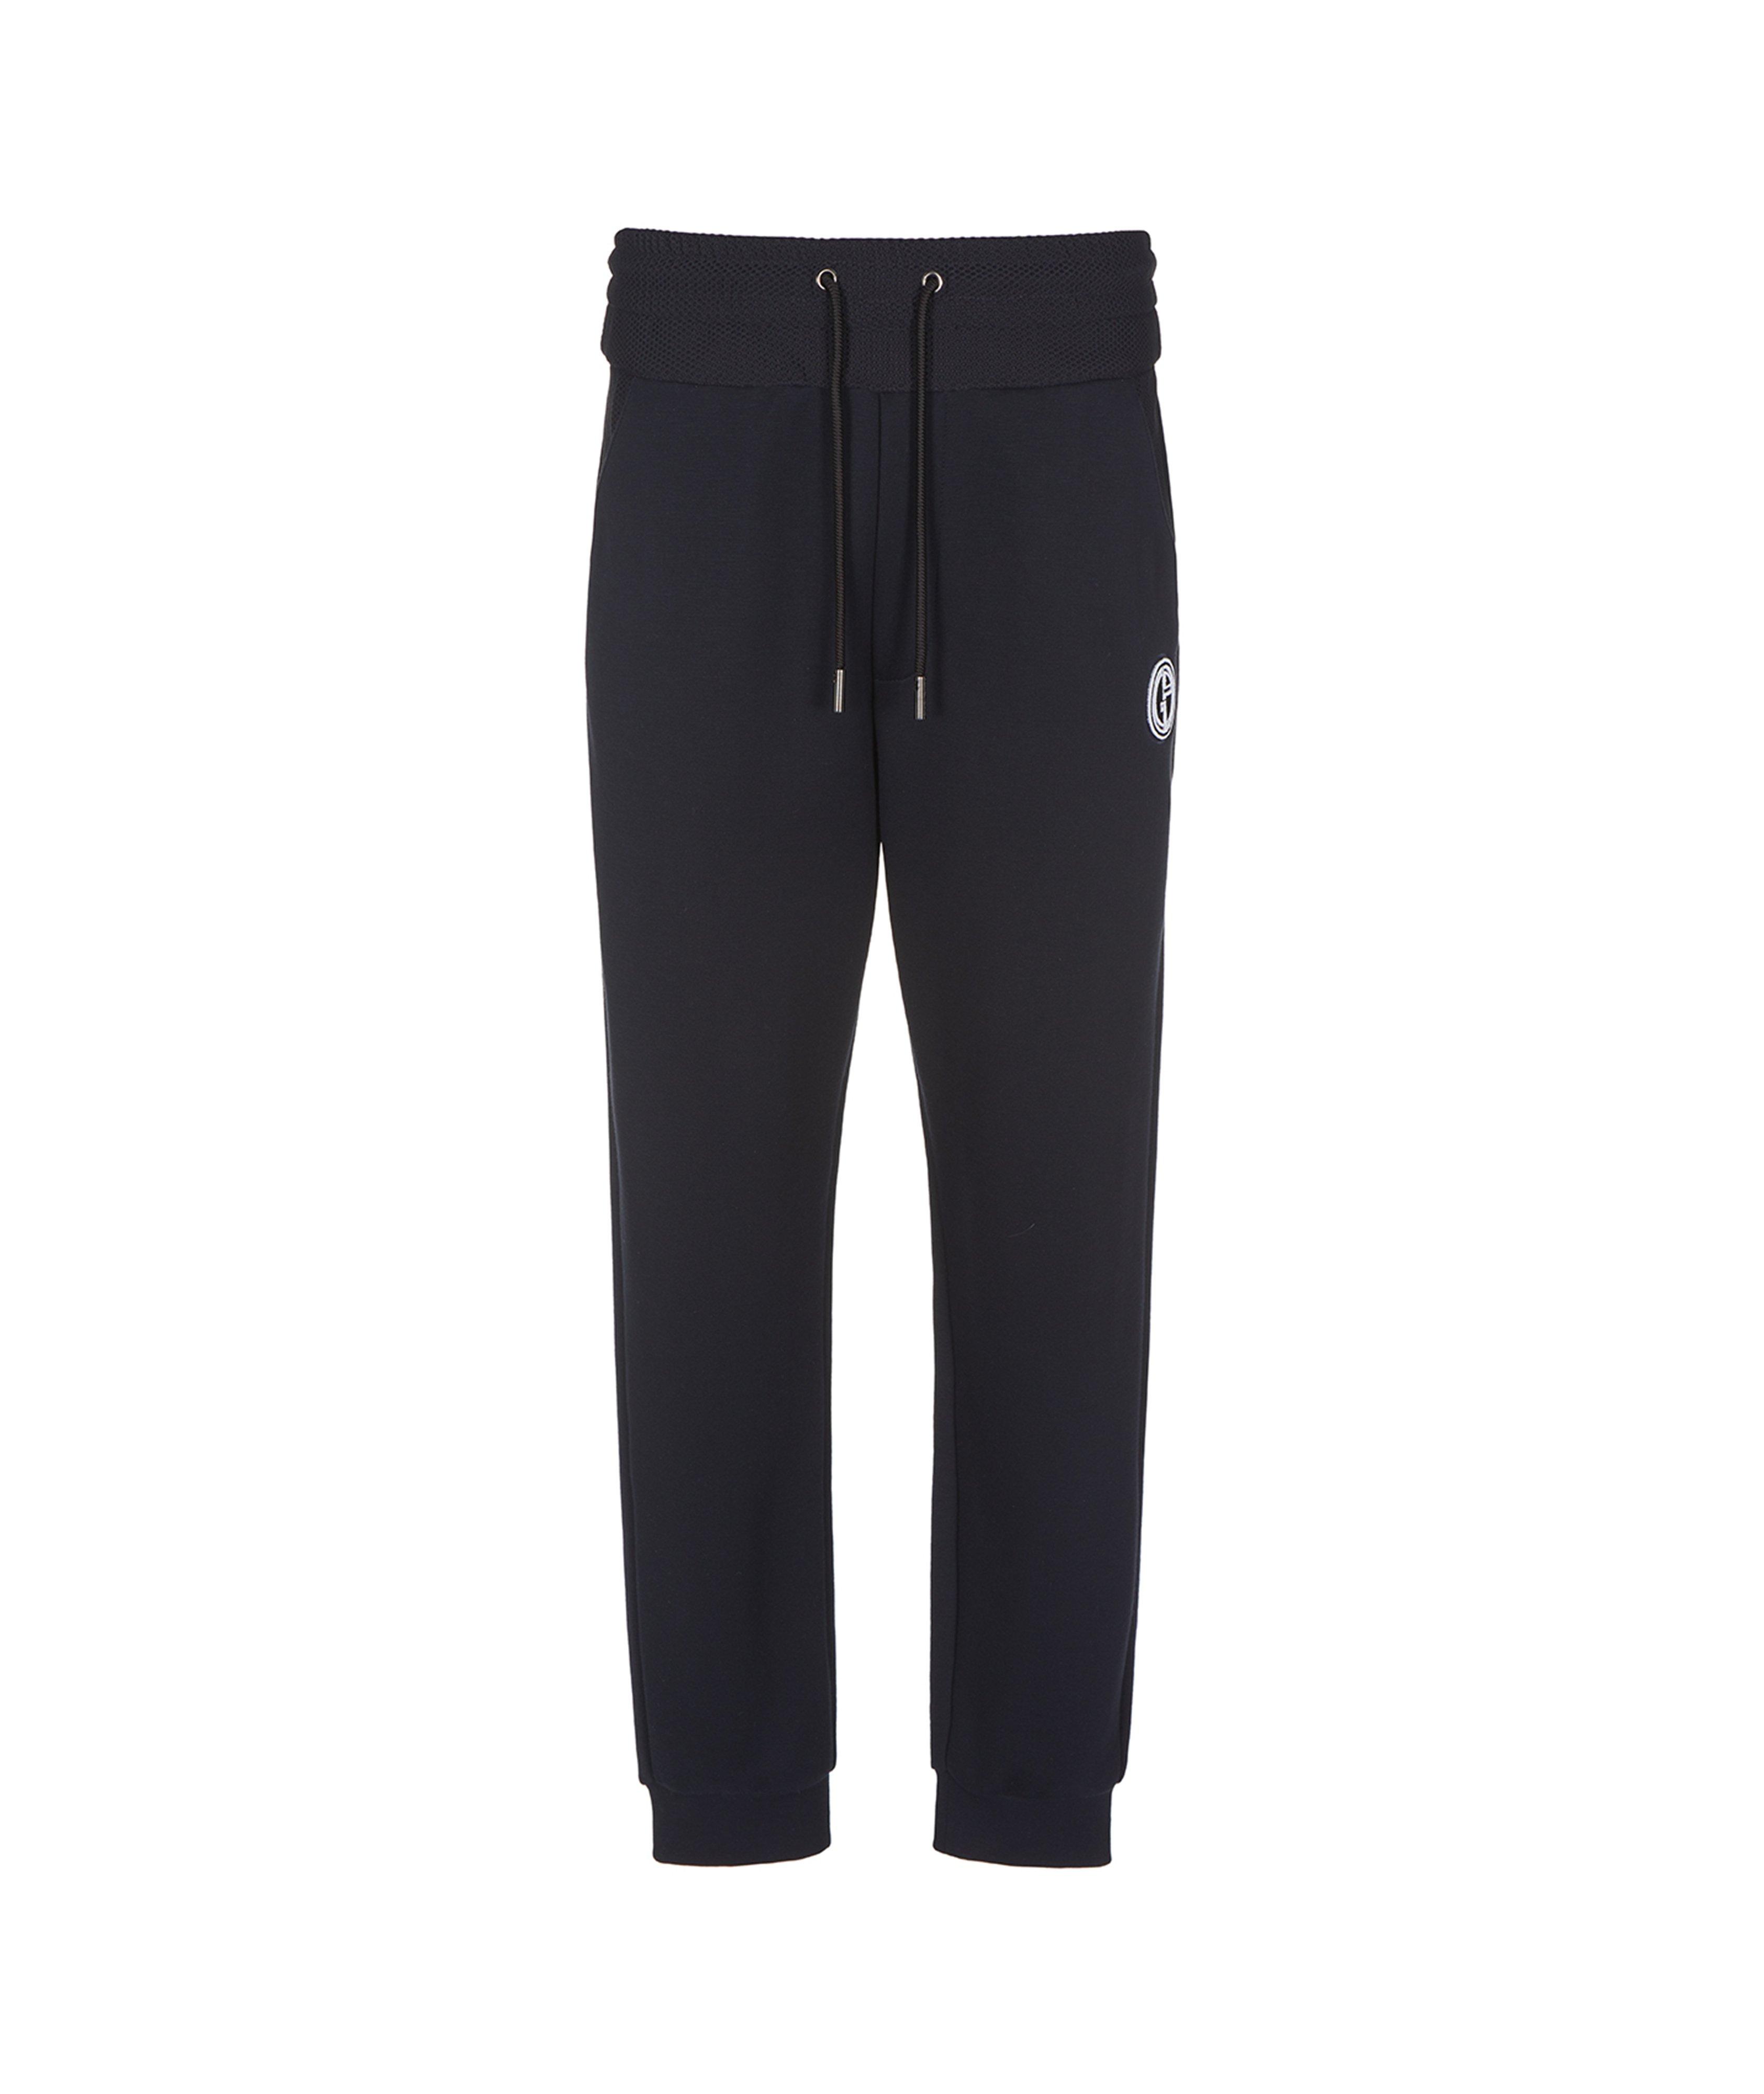 Double-jersey Joggers image 0